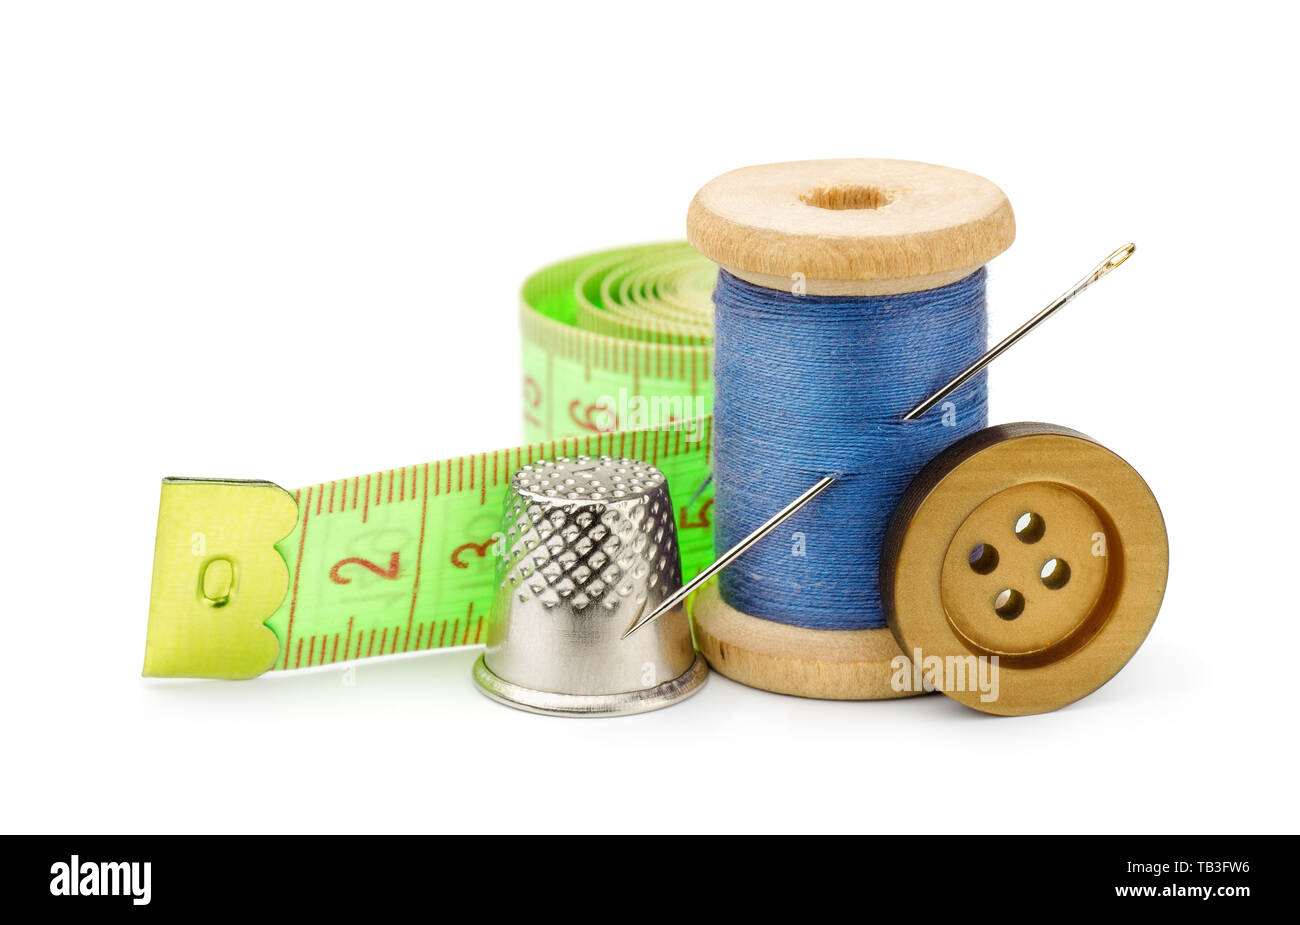 Spool of blue thread, needle, button, measuring tape and thimble isolated on white Stock Photo